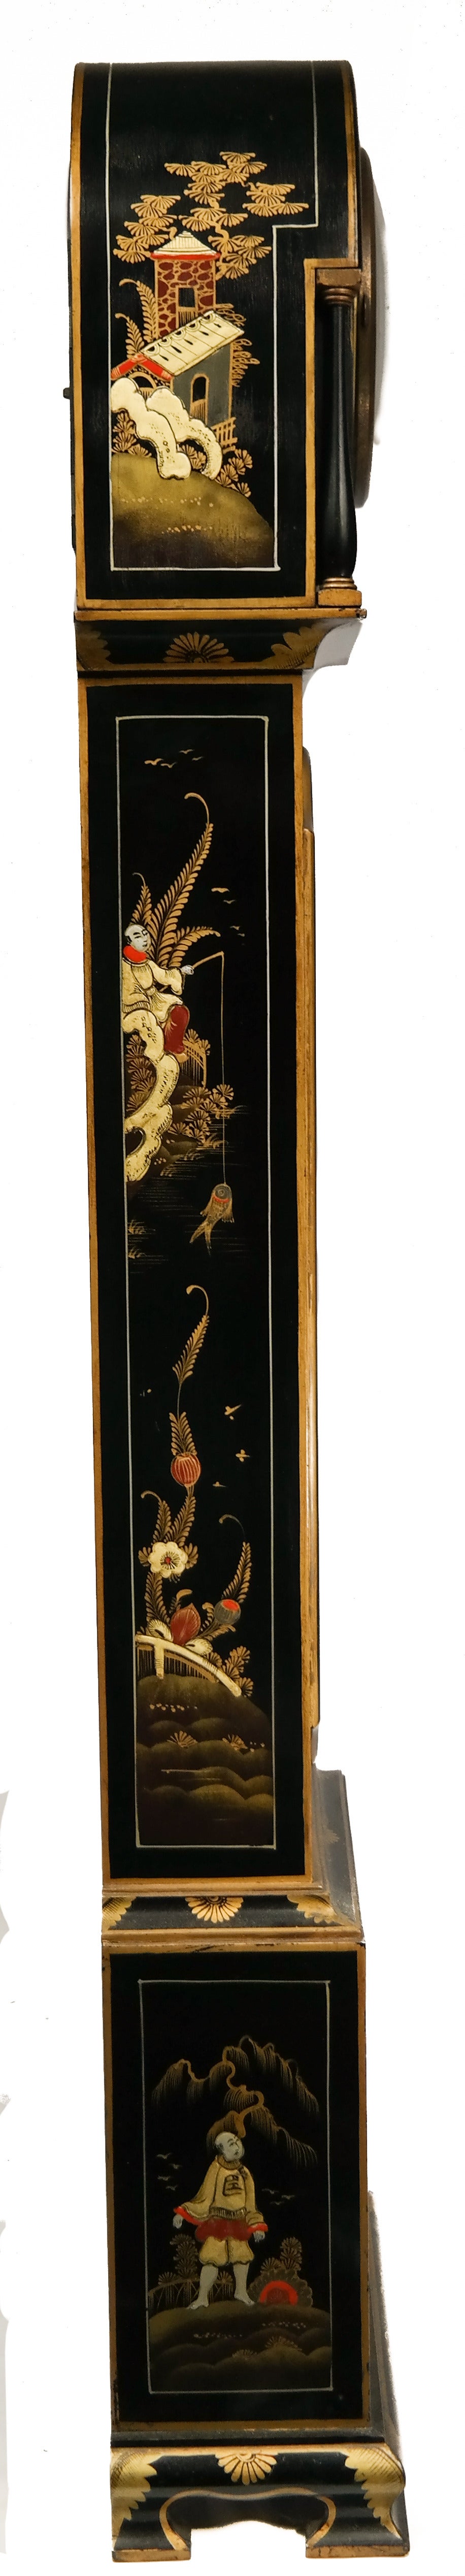 Early 20th century English chinoiserie Grandmother clock, black lacquered background with gold leaf depicting a pastoral scene with figures conversing next to a bridge. Phenomenal condition.